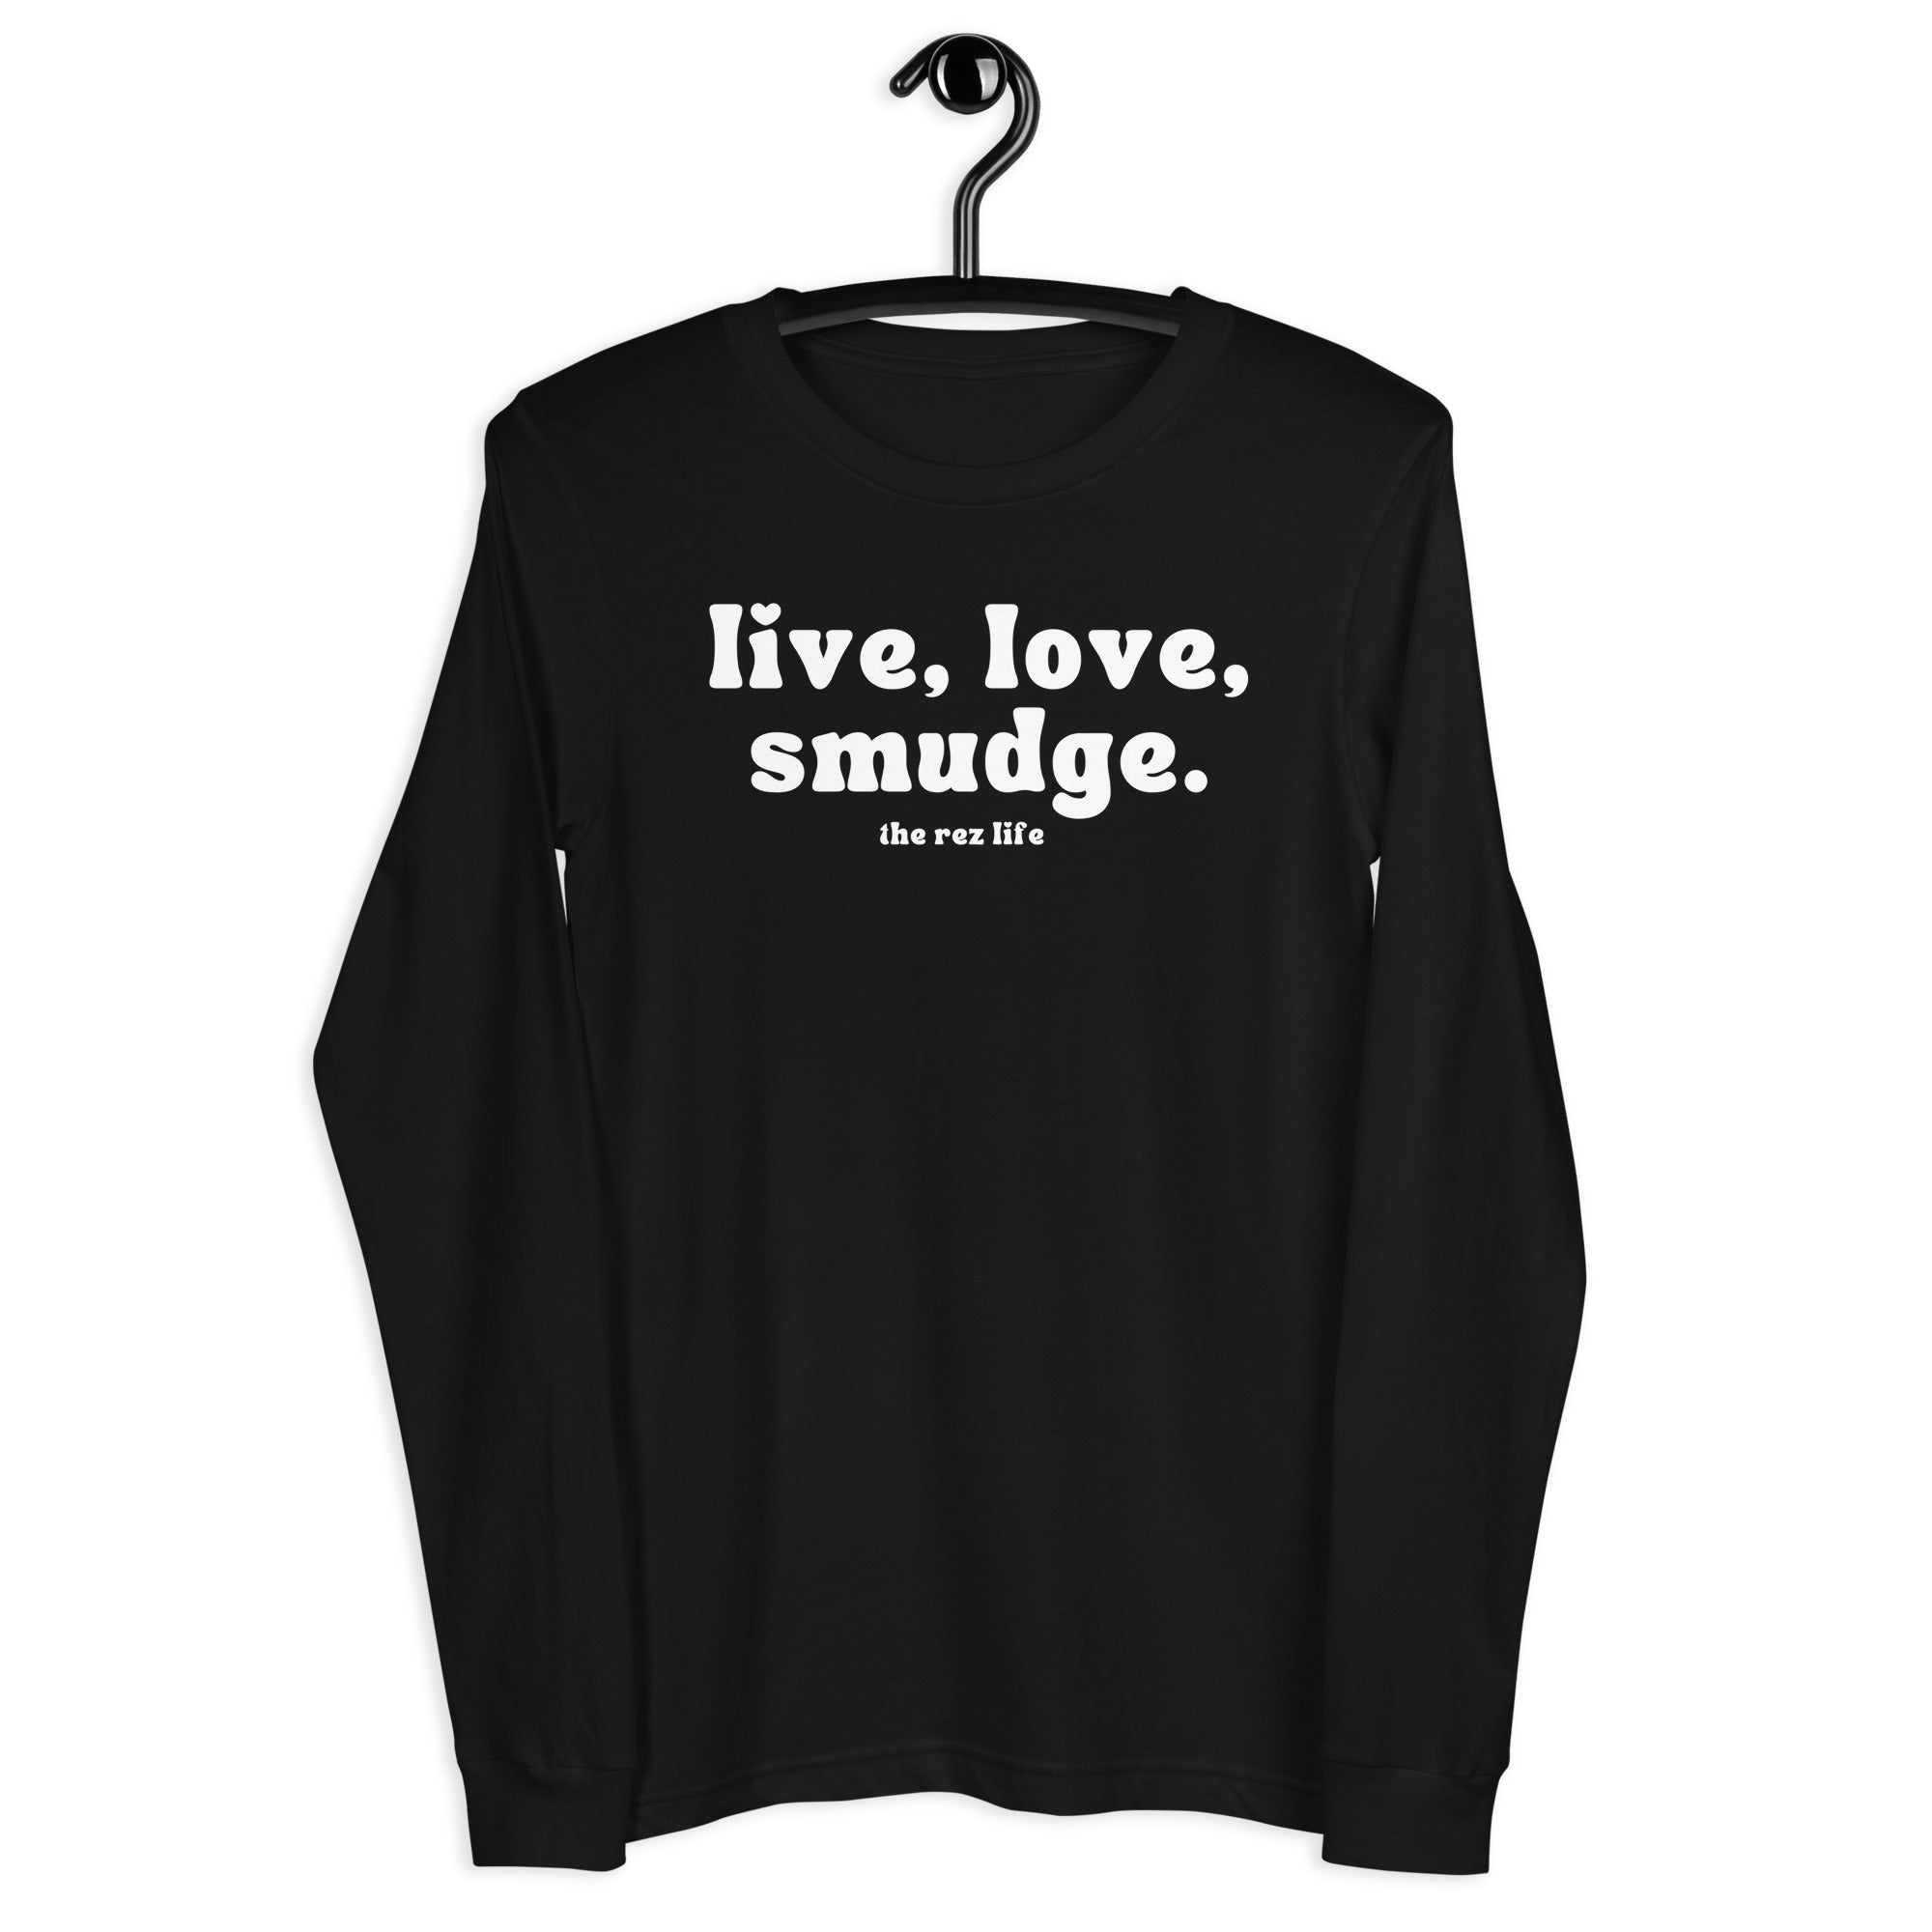 This Is The Way to Live, Love, Smudge! Long Sleeve